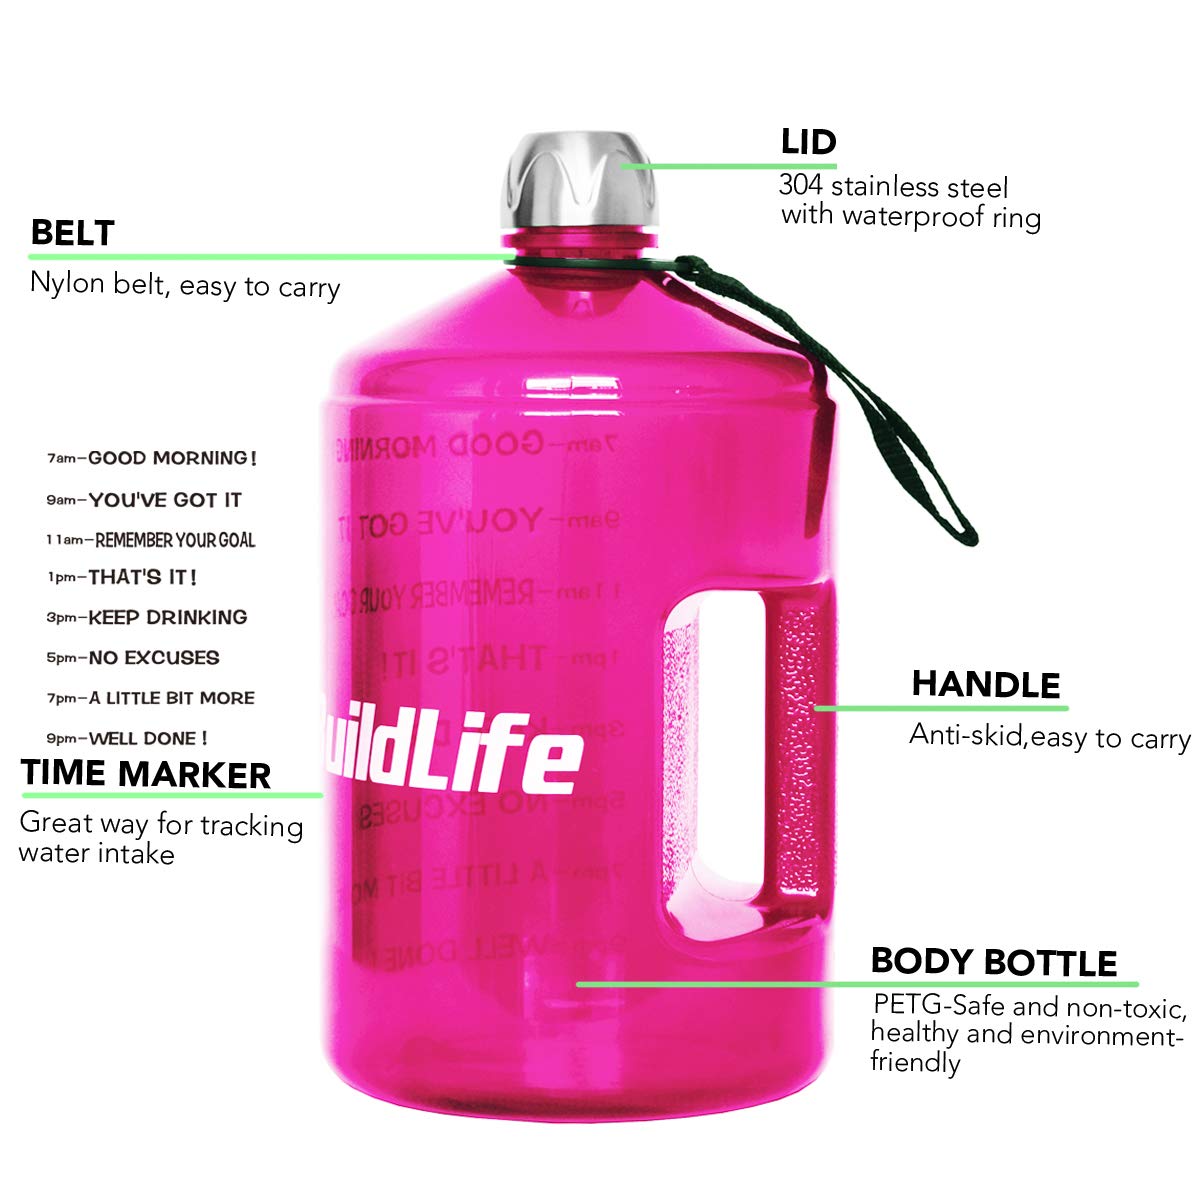 BuildLife 1 Gallon Water Bottle Motivational Fitness Workout with Time Marker/Drink More Daily/Clear BPA Free/Large 128OZ Capacity Throughout The Day(Pink, 1 Gallon)